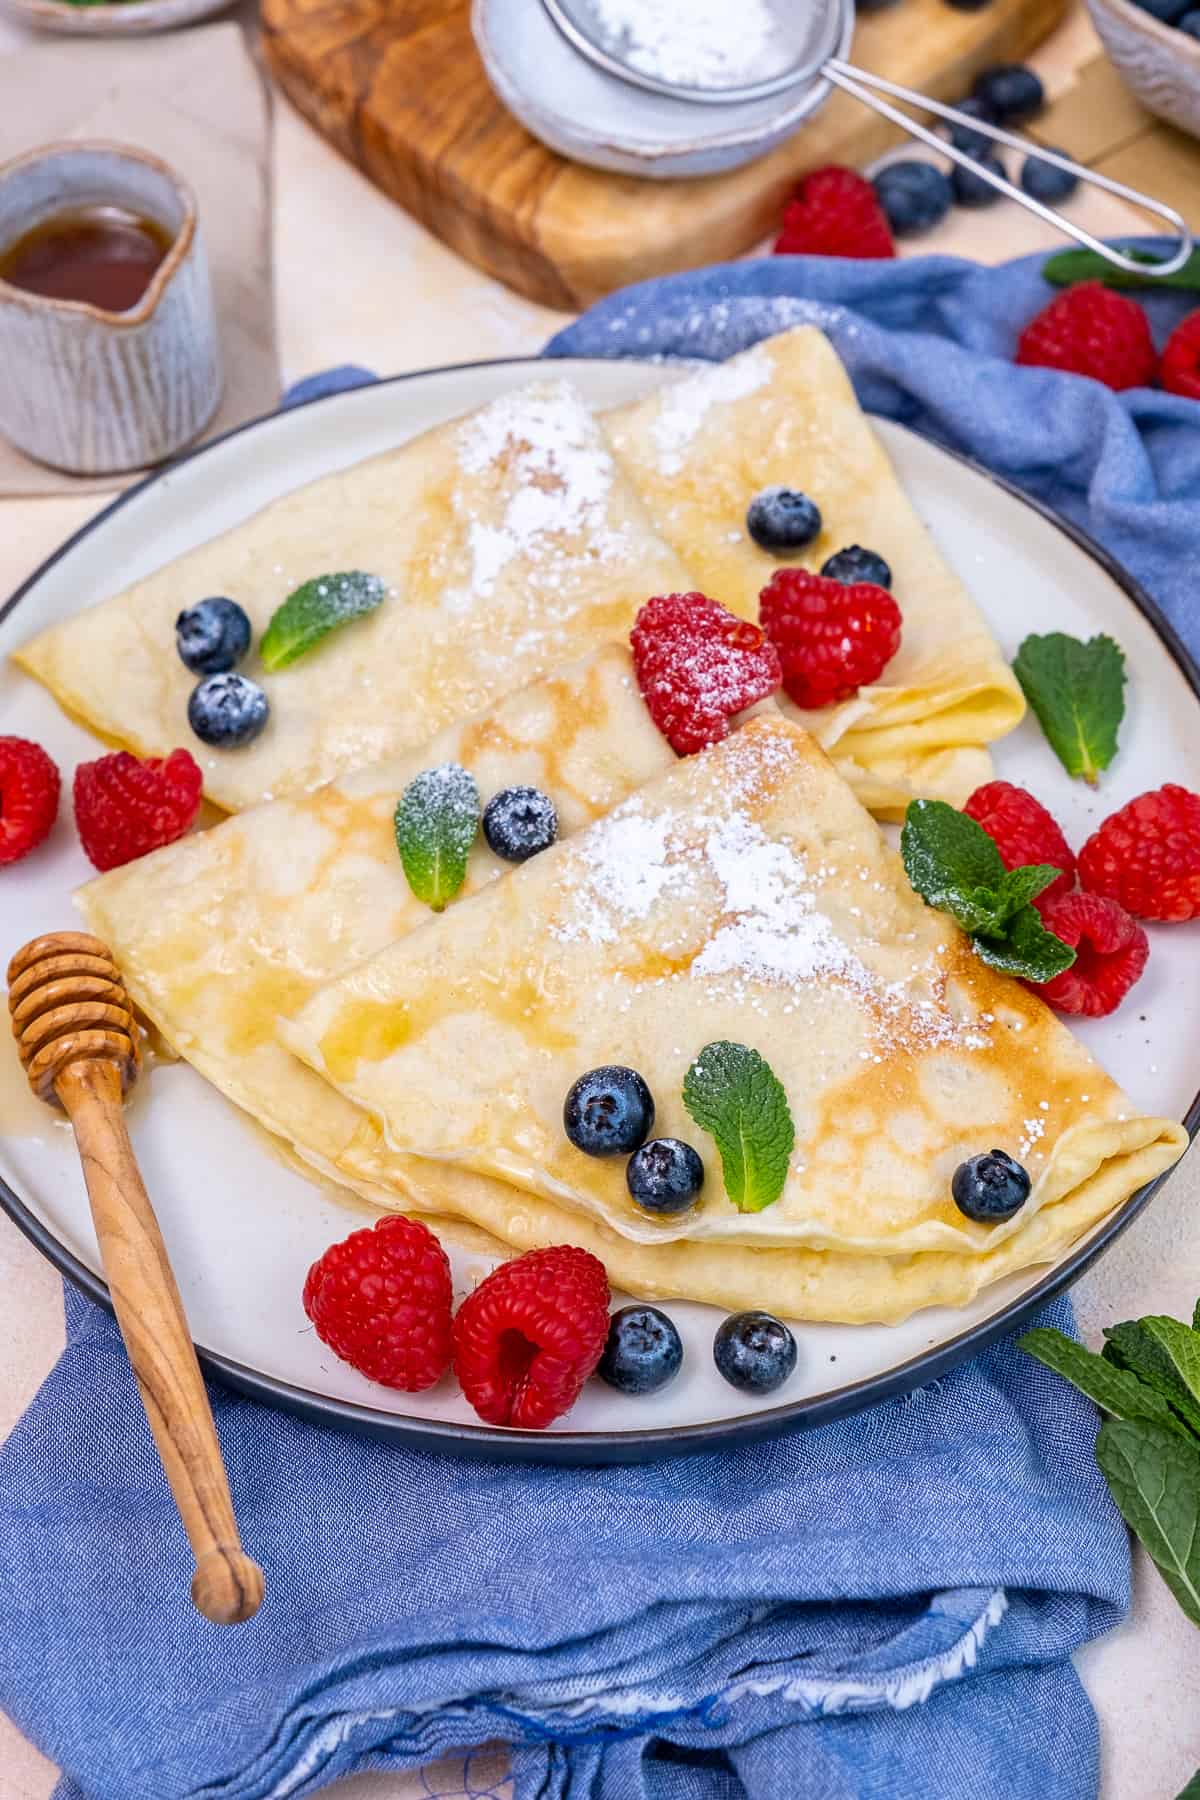 Crepes with powdered sugar, fresh berries and mint leaves on a plate.